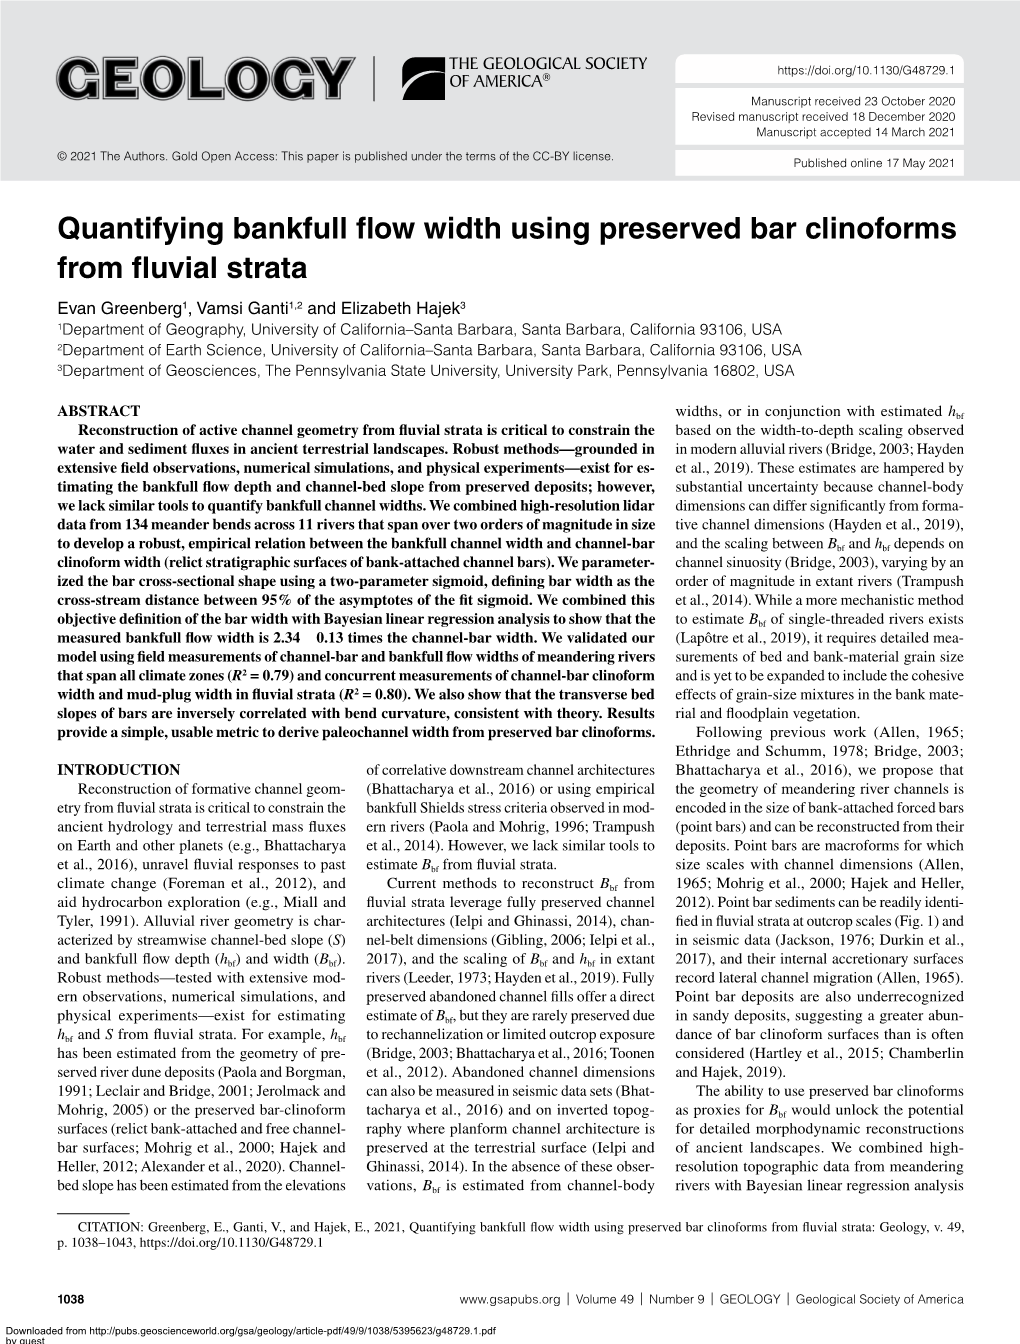 Quantifying Bankfull Flow Width Using Preserved Bar Clinoforms From